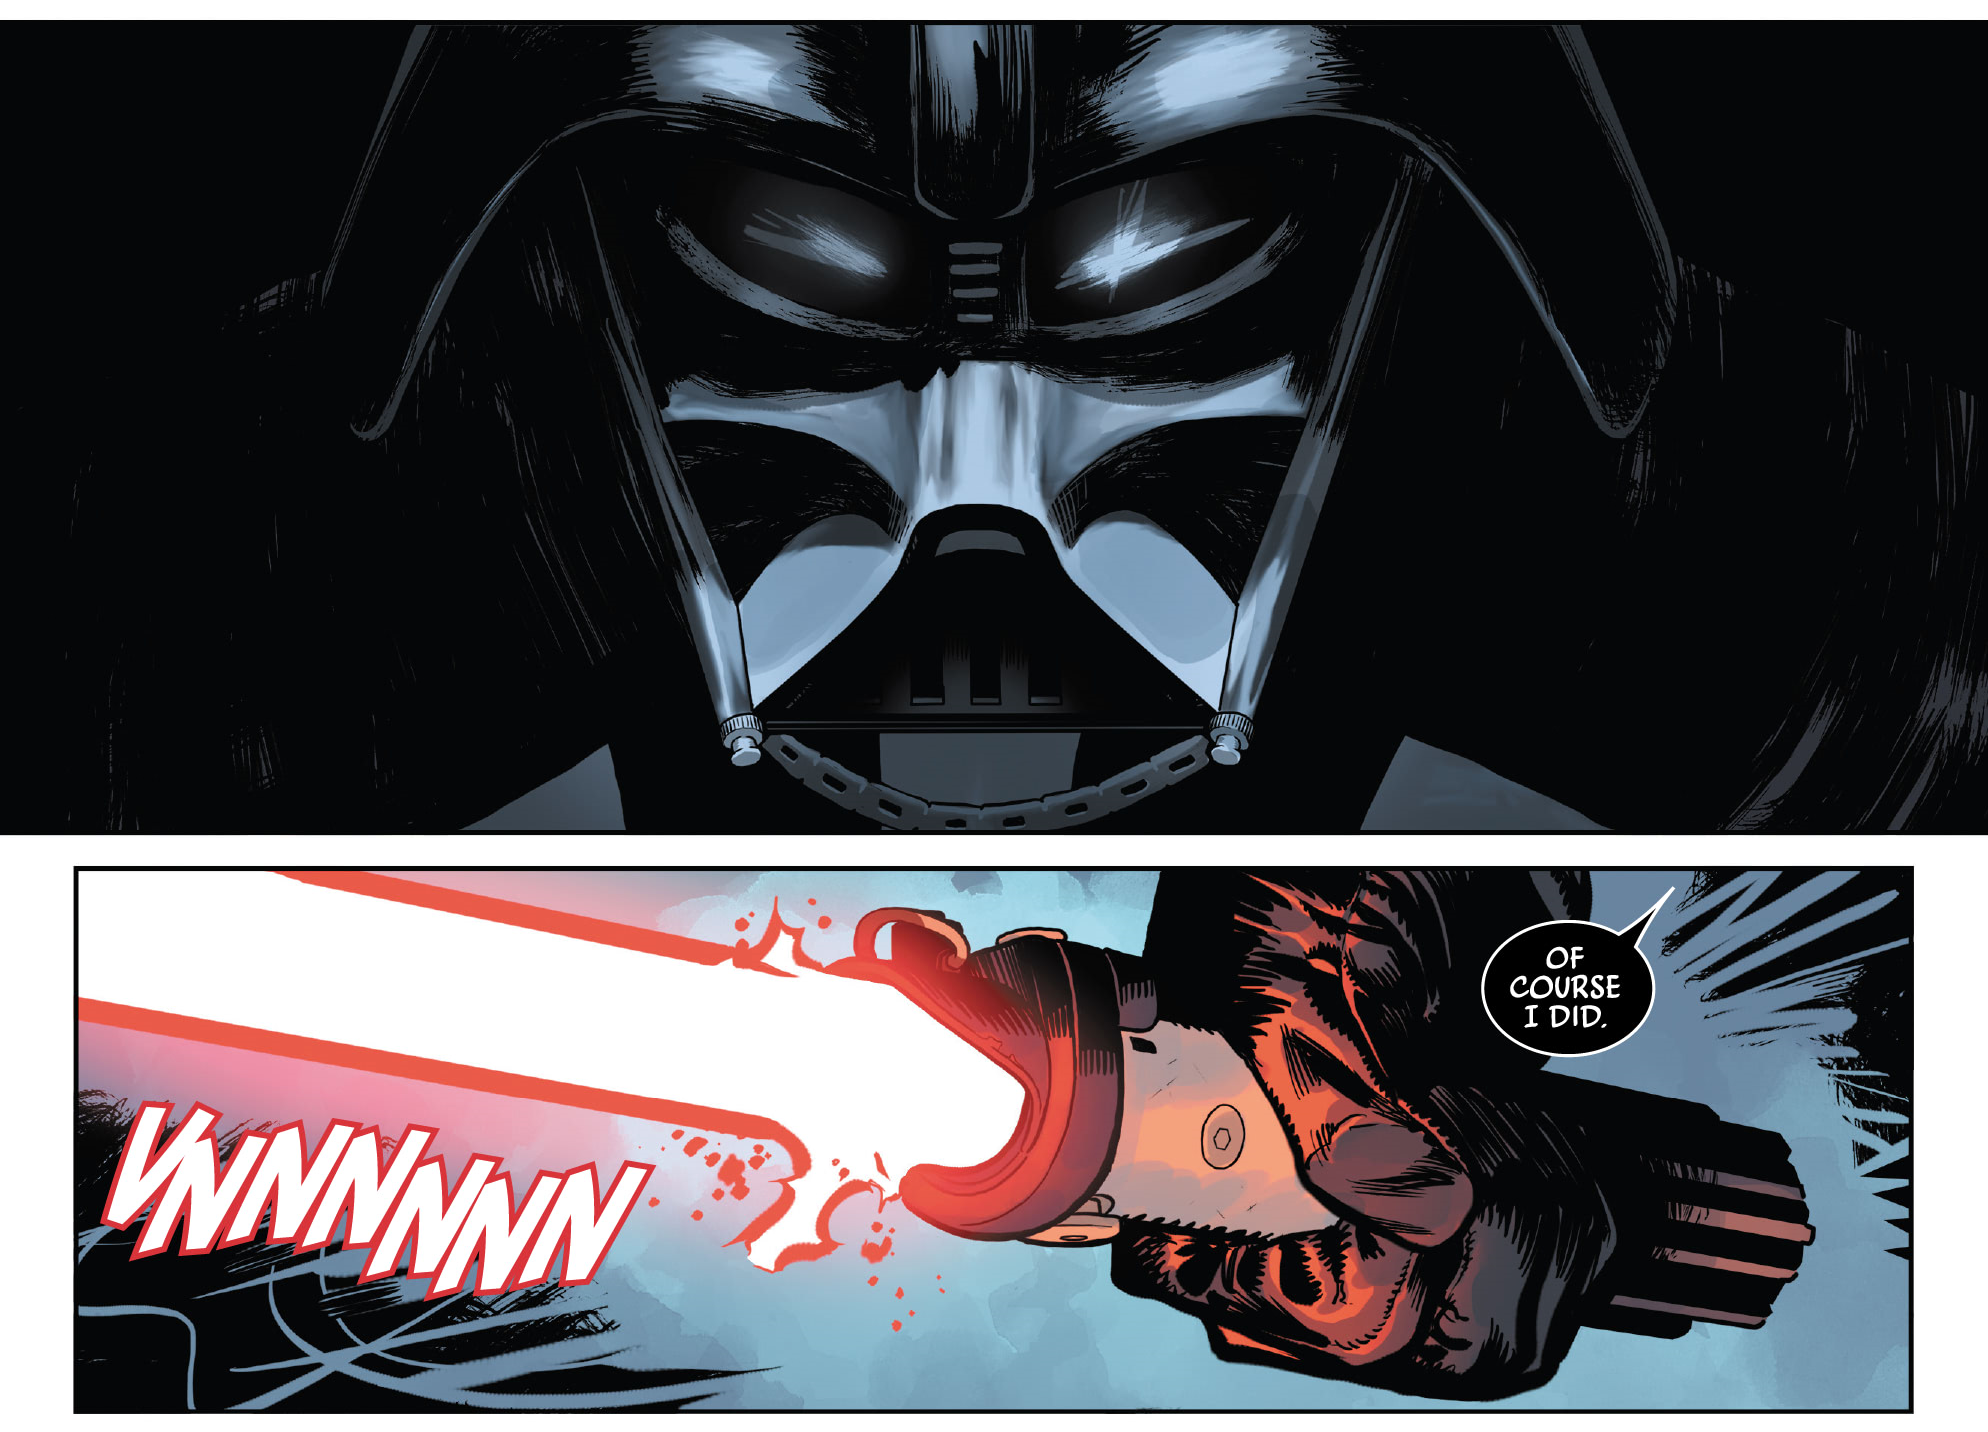 Darth Vader Is Letting the Past Die